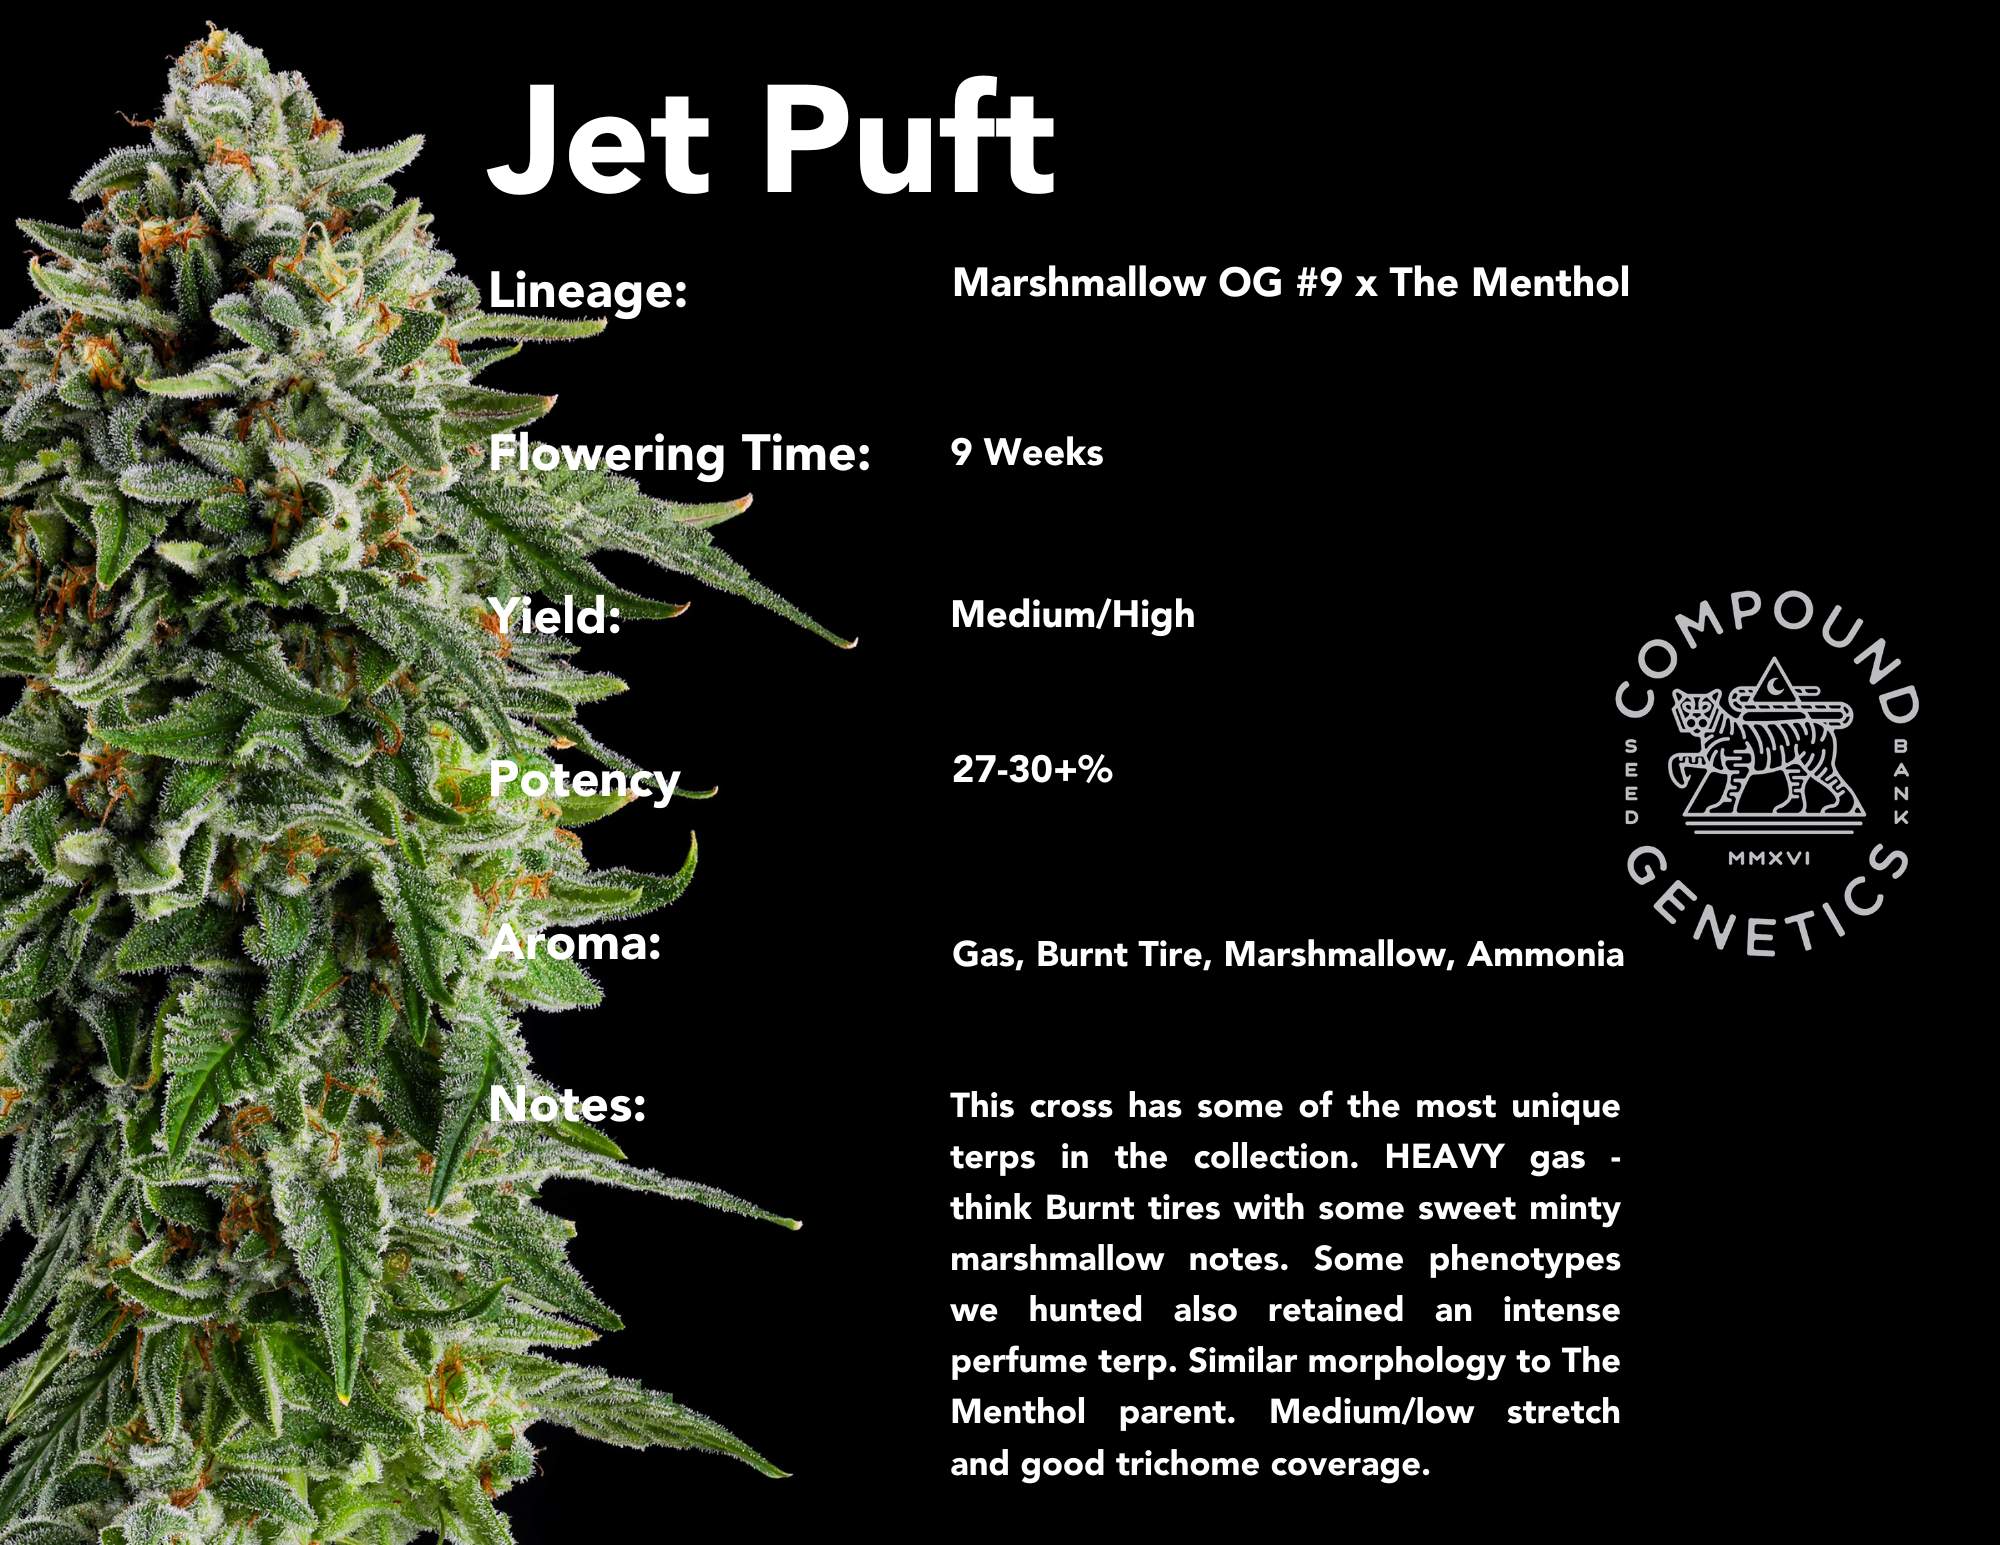 Jet Puft bred by Compound Genetics - Marshmallow OG #9 x The Menthol